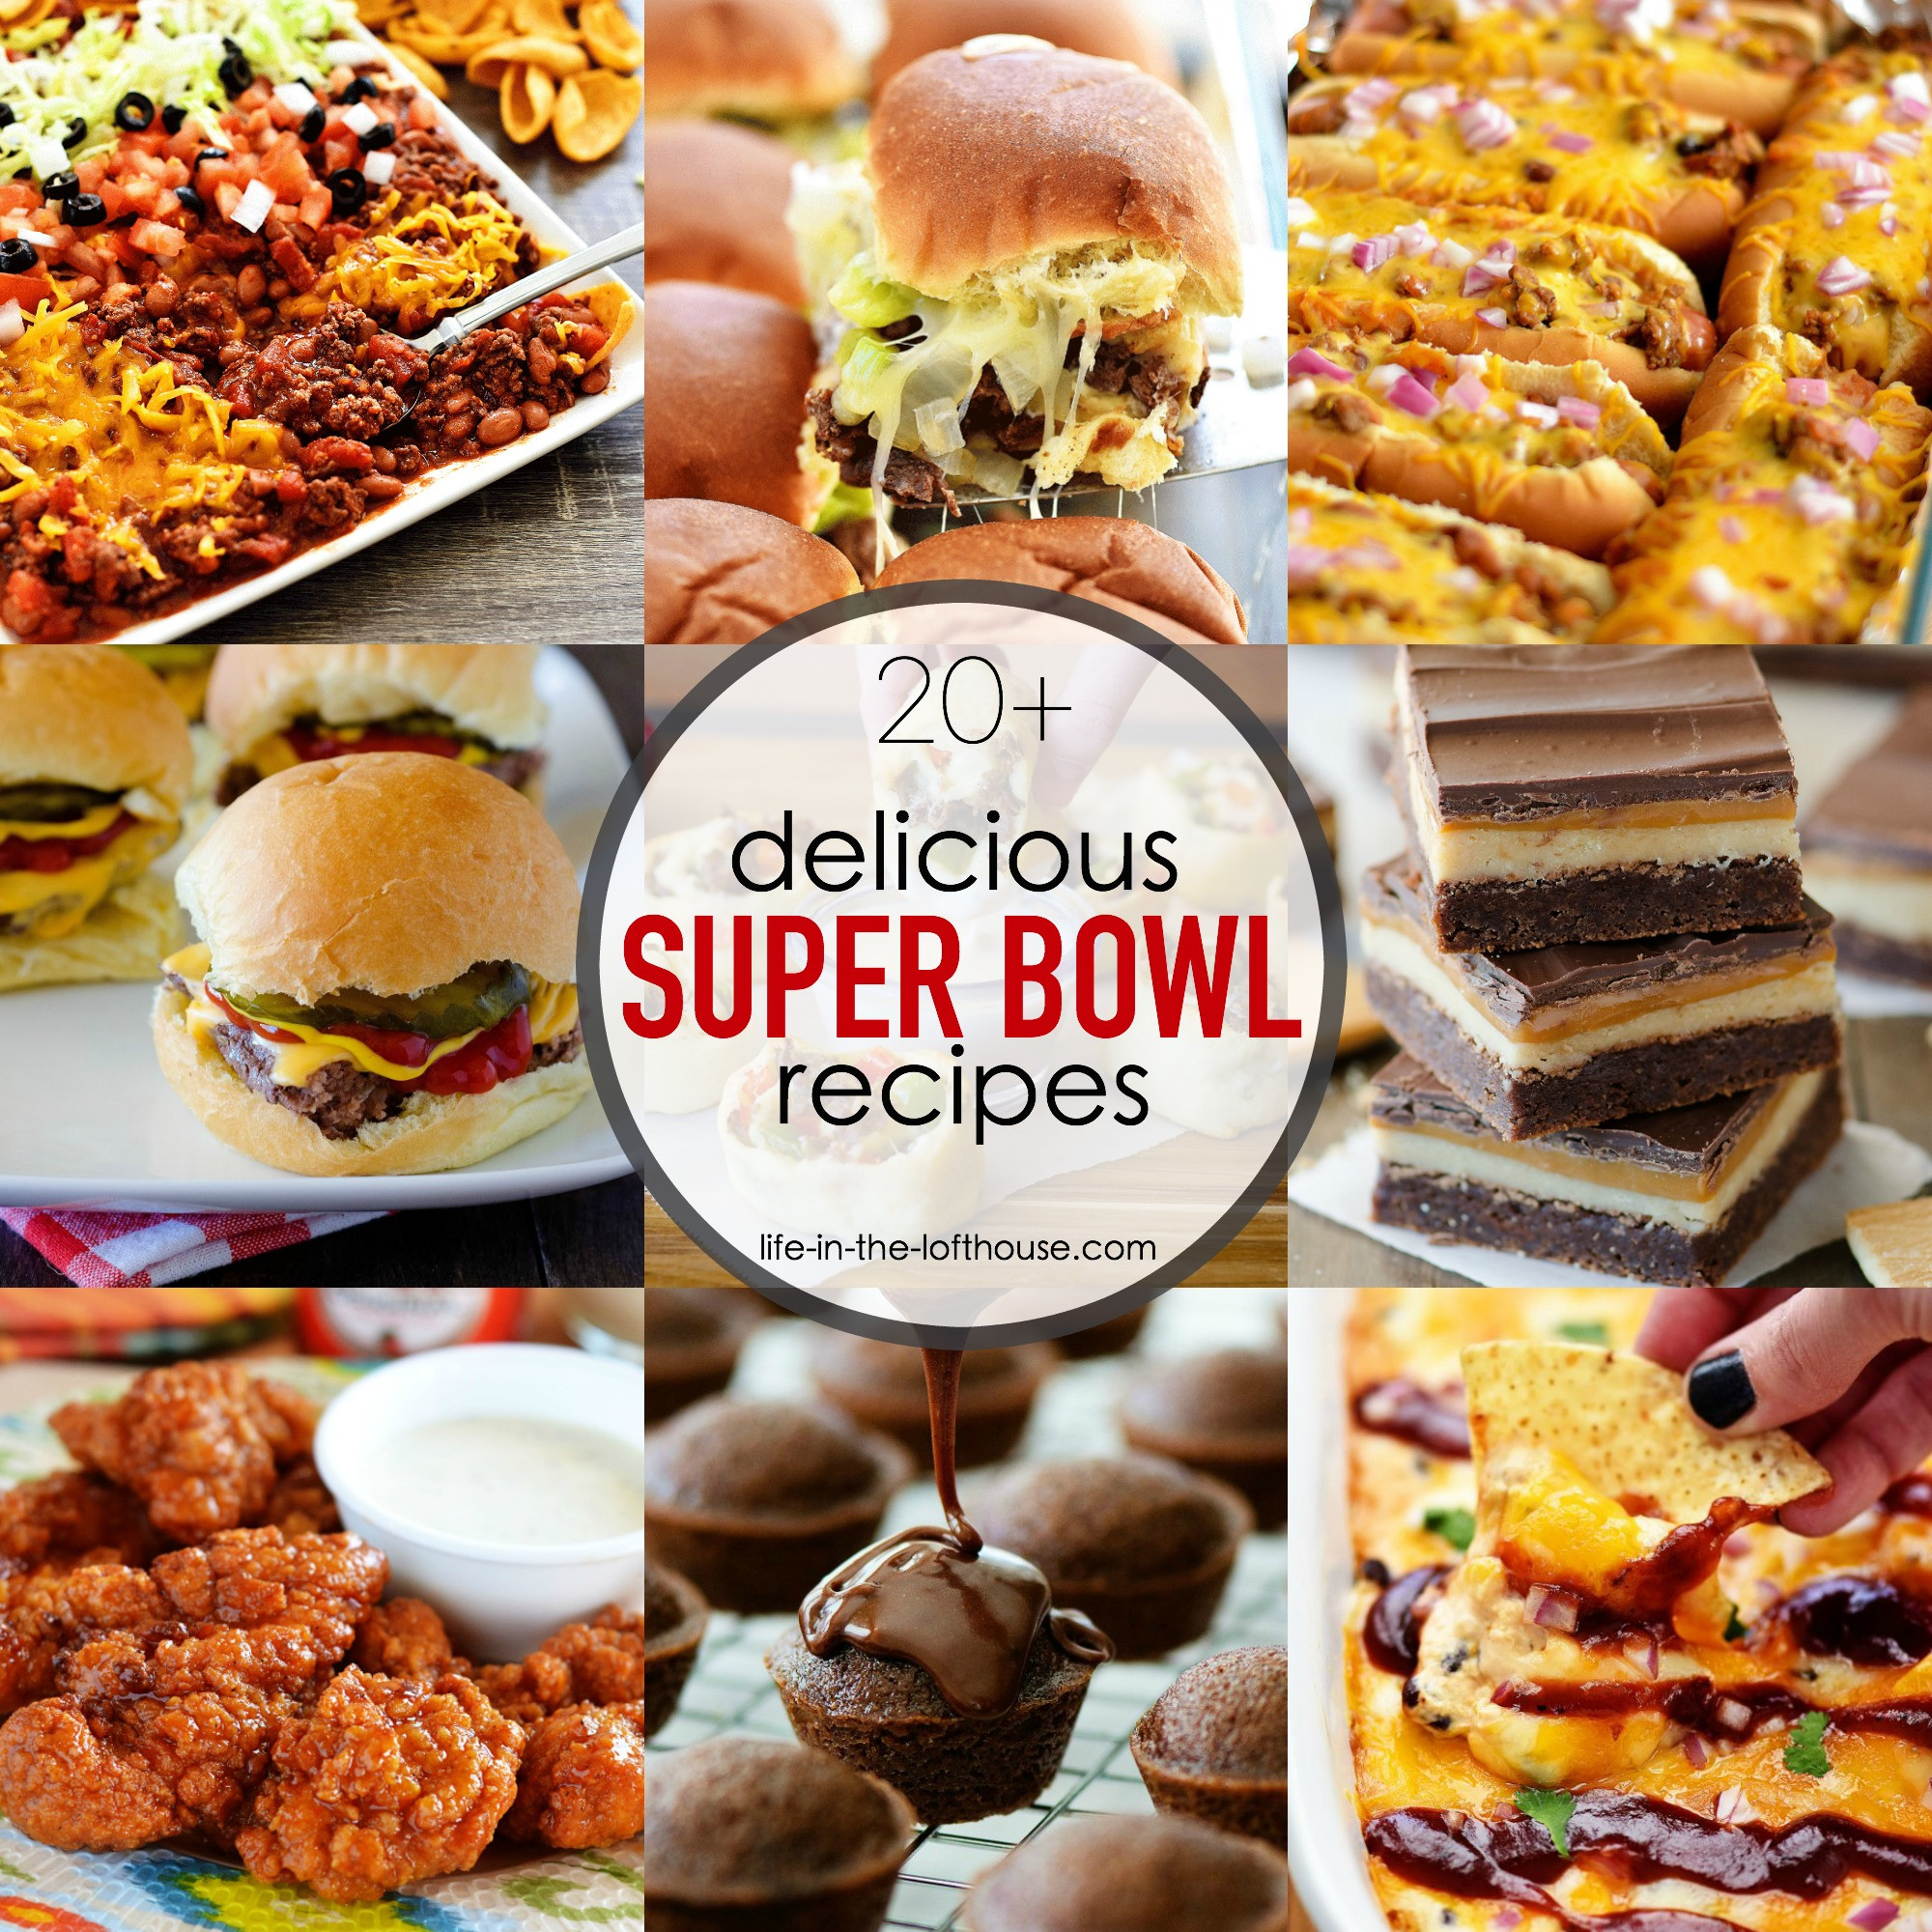 Super Bowl Dishes Recipes
 20 Super Bowl Recipes Life In The Lofthouse